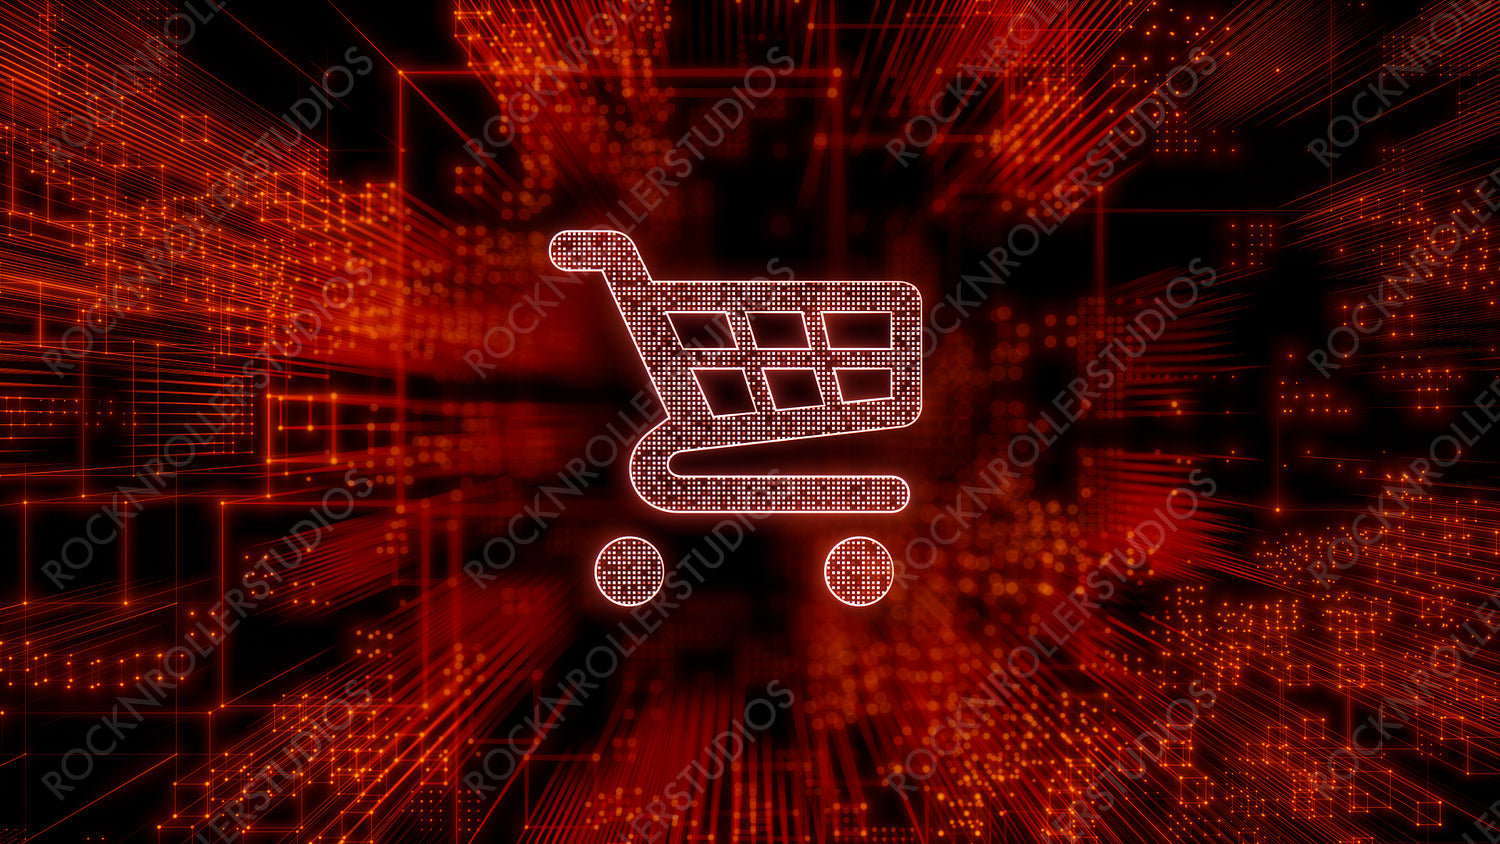 Ecommerce Technology Concept with shopping symbol against a Futuristic, Orange Digital Grid background. Network Tech Wallpaper. 3D Render